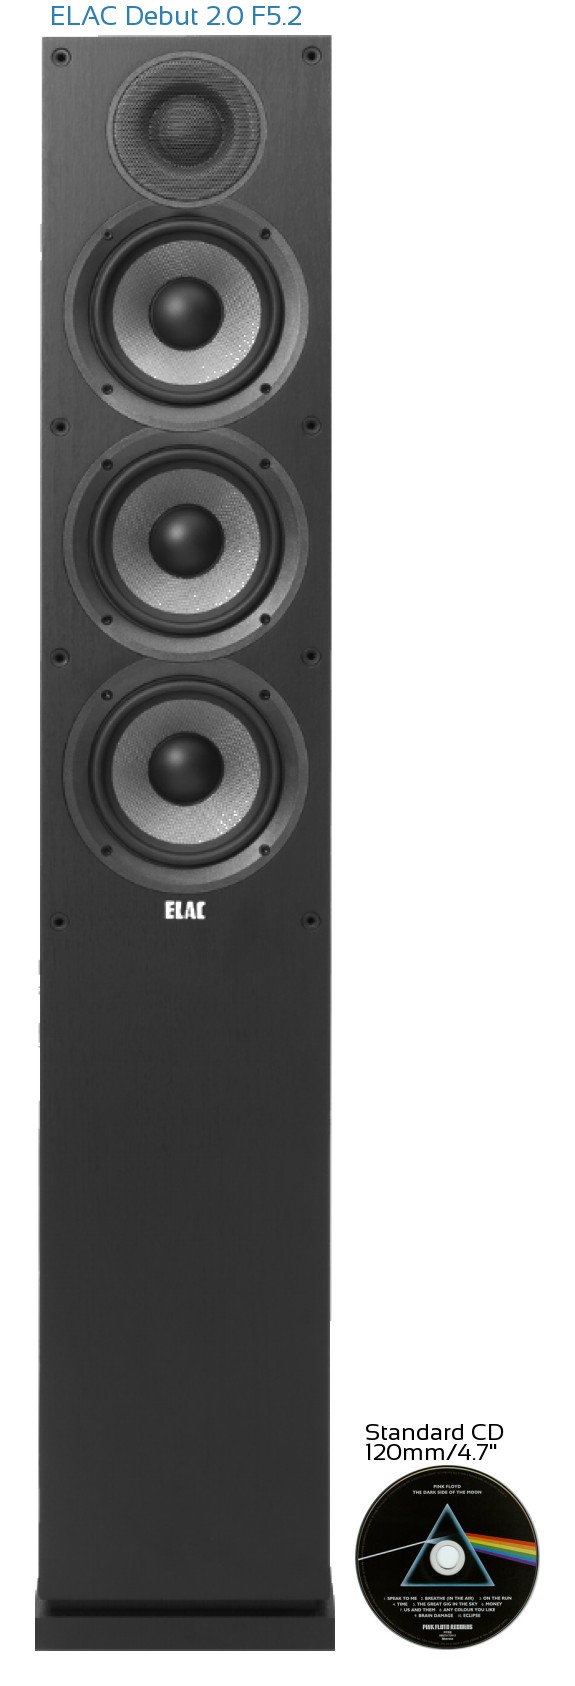 ELAC Debut 2.0 F5.2 Real Life Body Size Comparison